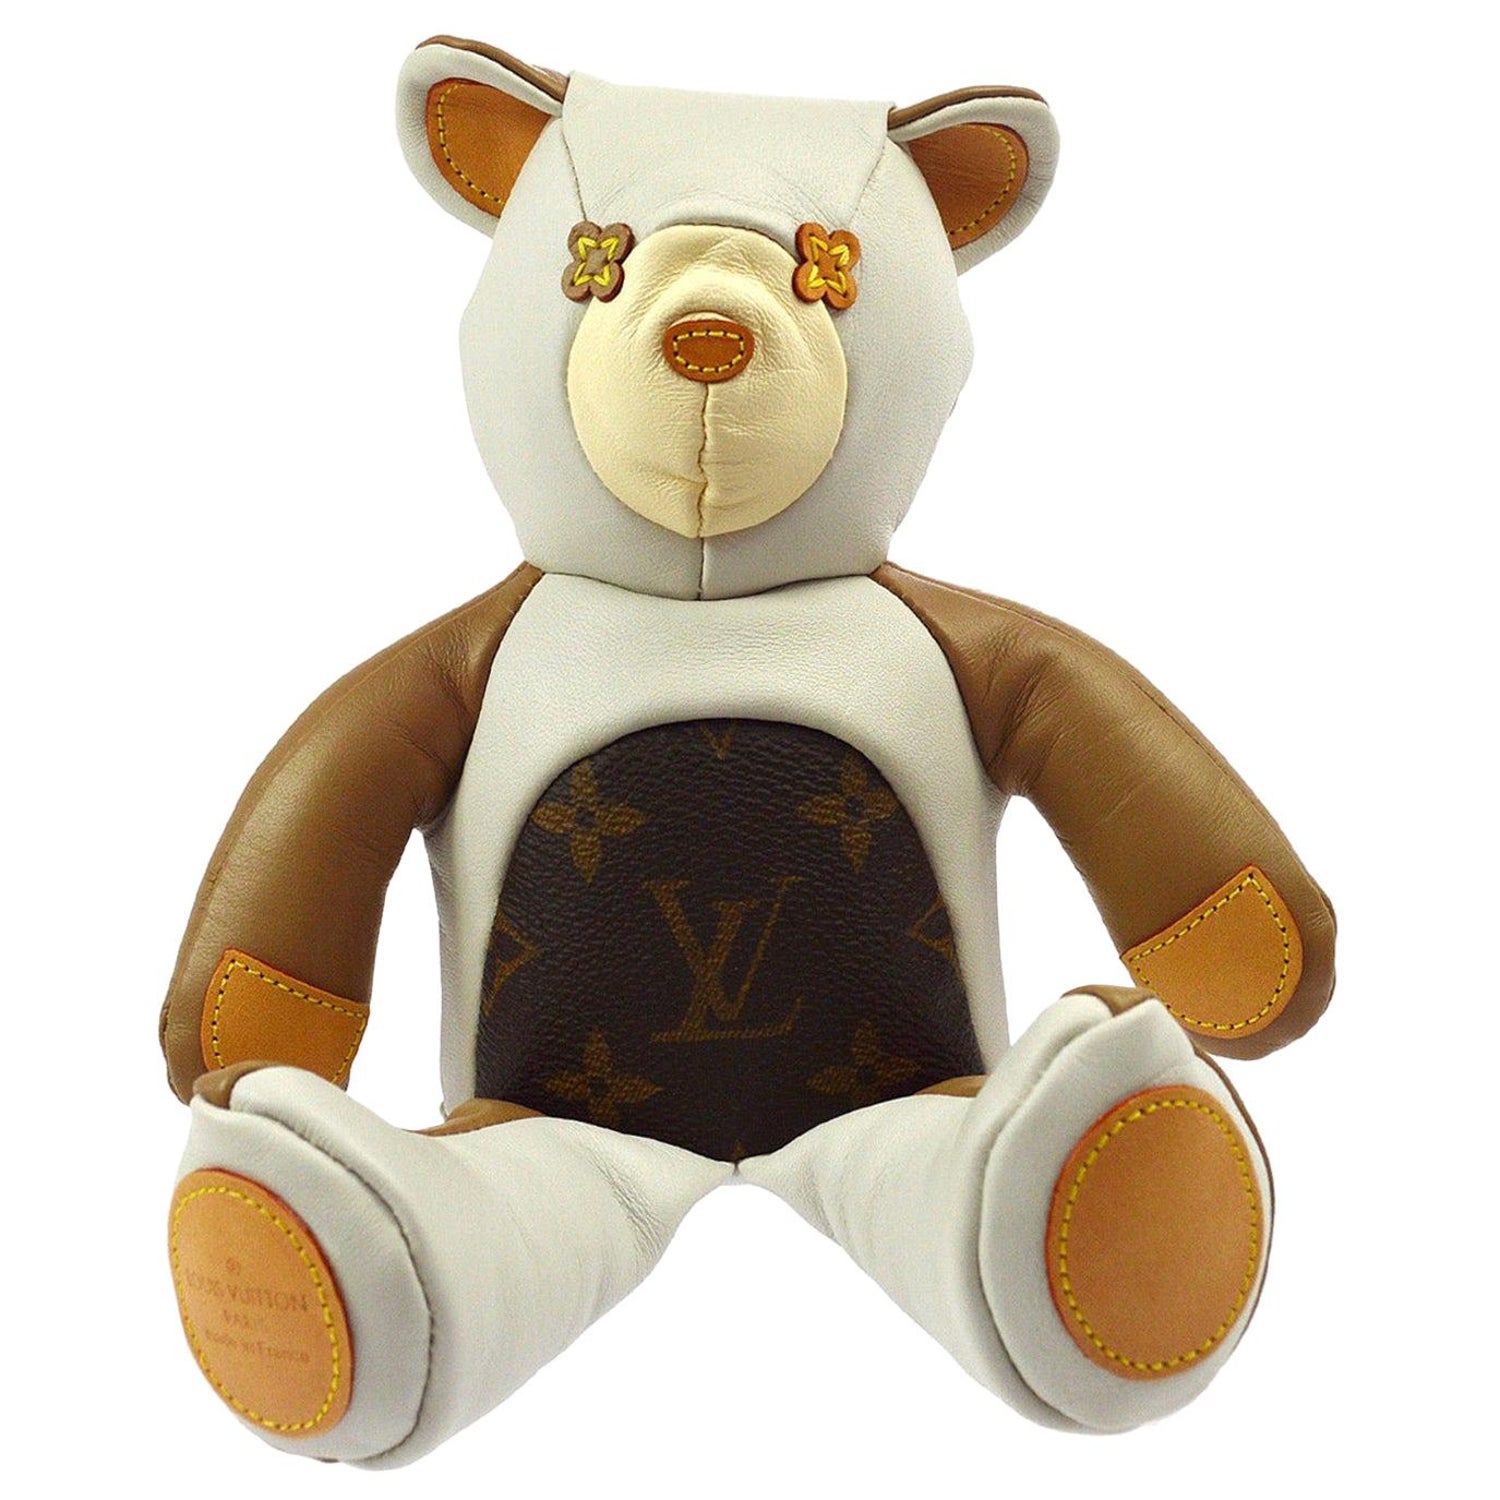 The controversy of Louis Vuitton's monogrammed teddy bear